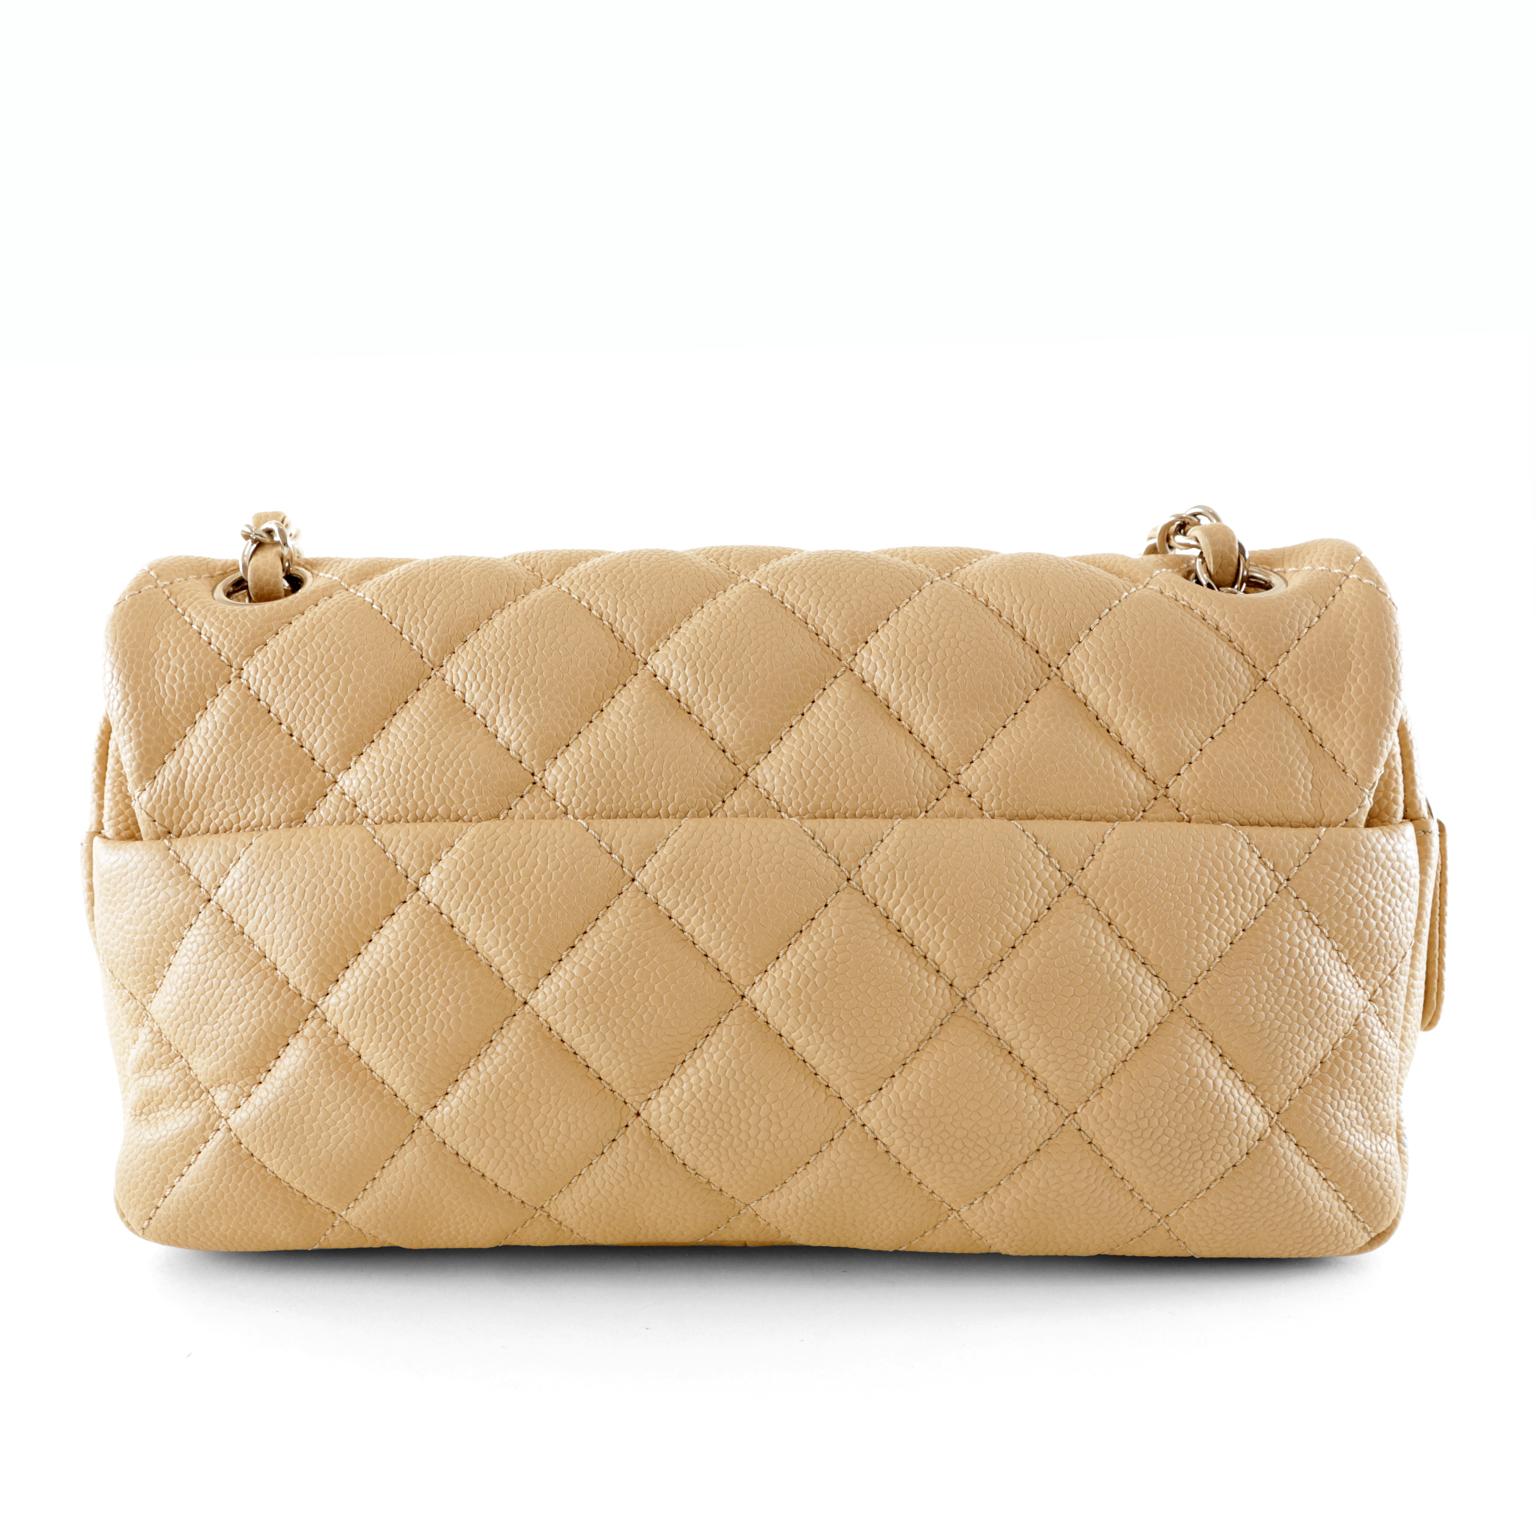 Chanel Beige Caviar Zipper Classic Bag- Pristine Condition
The perfect medium sized neutral bag, this Chanel complements every ensemble elegantly.  
Durable beige caviar leather is quilted in signature Chanel diamond pattern.  Silver interlocking CC